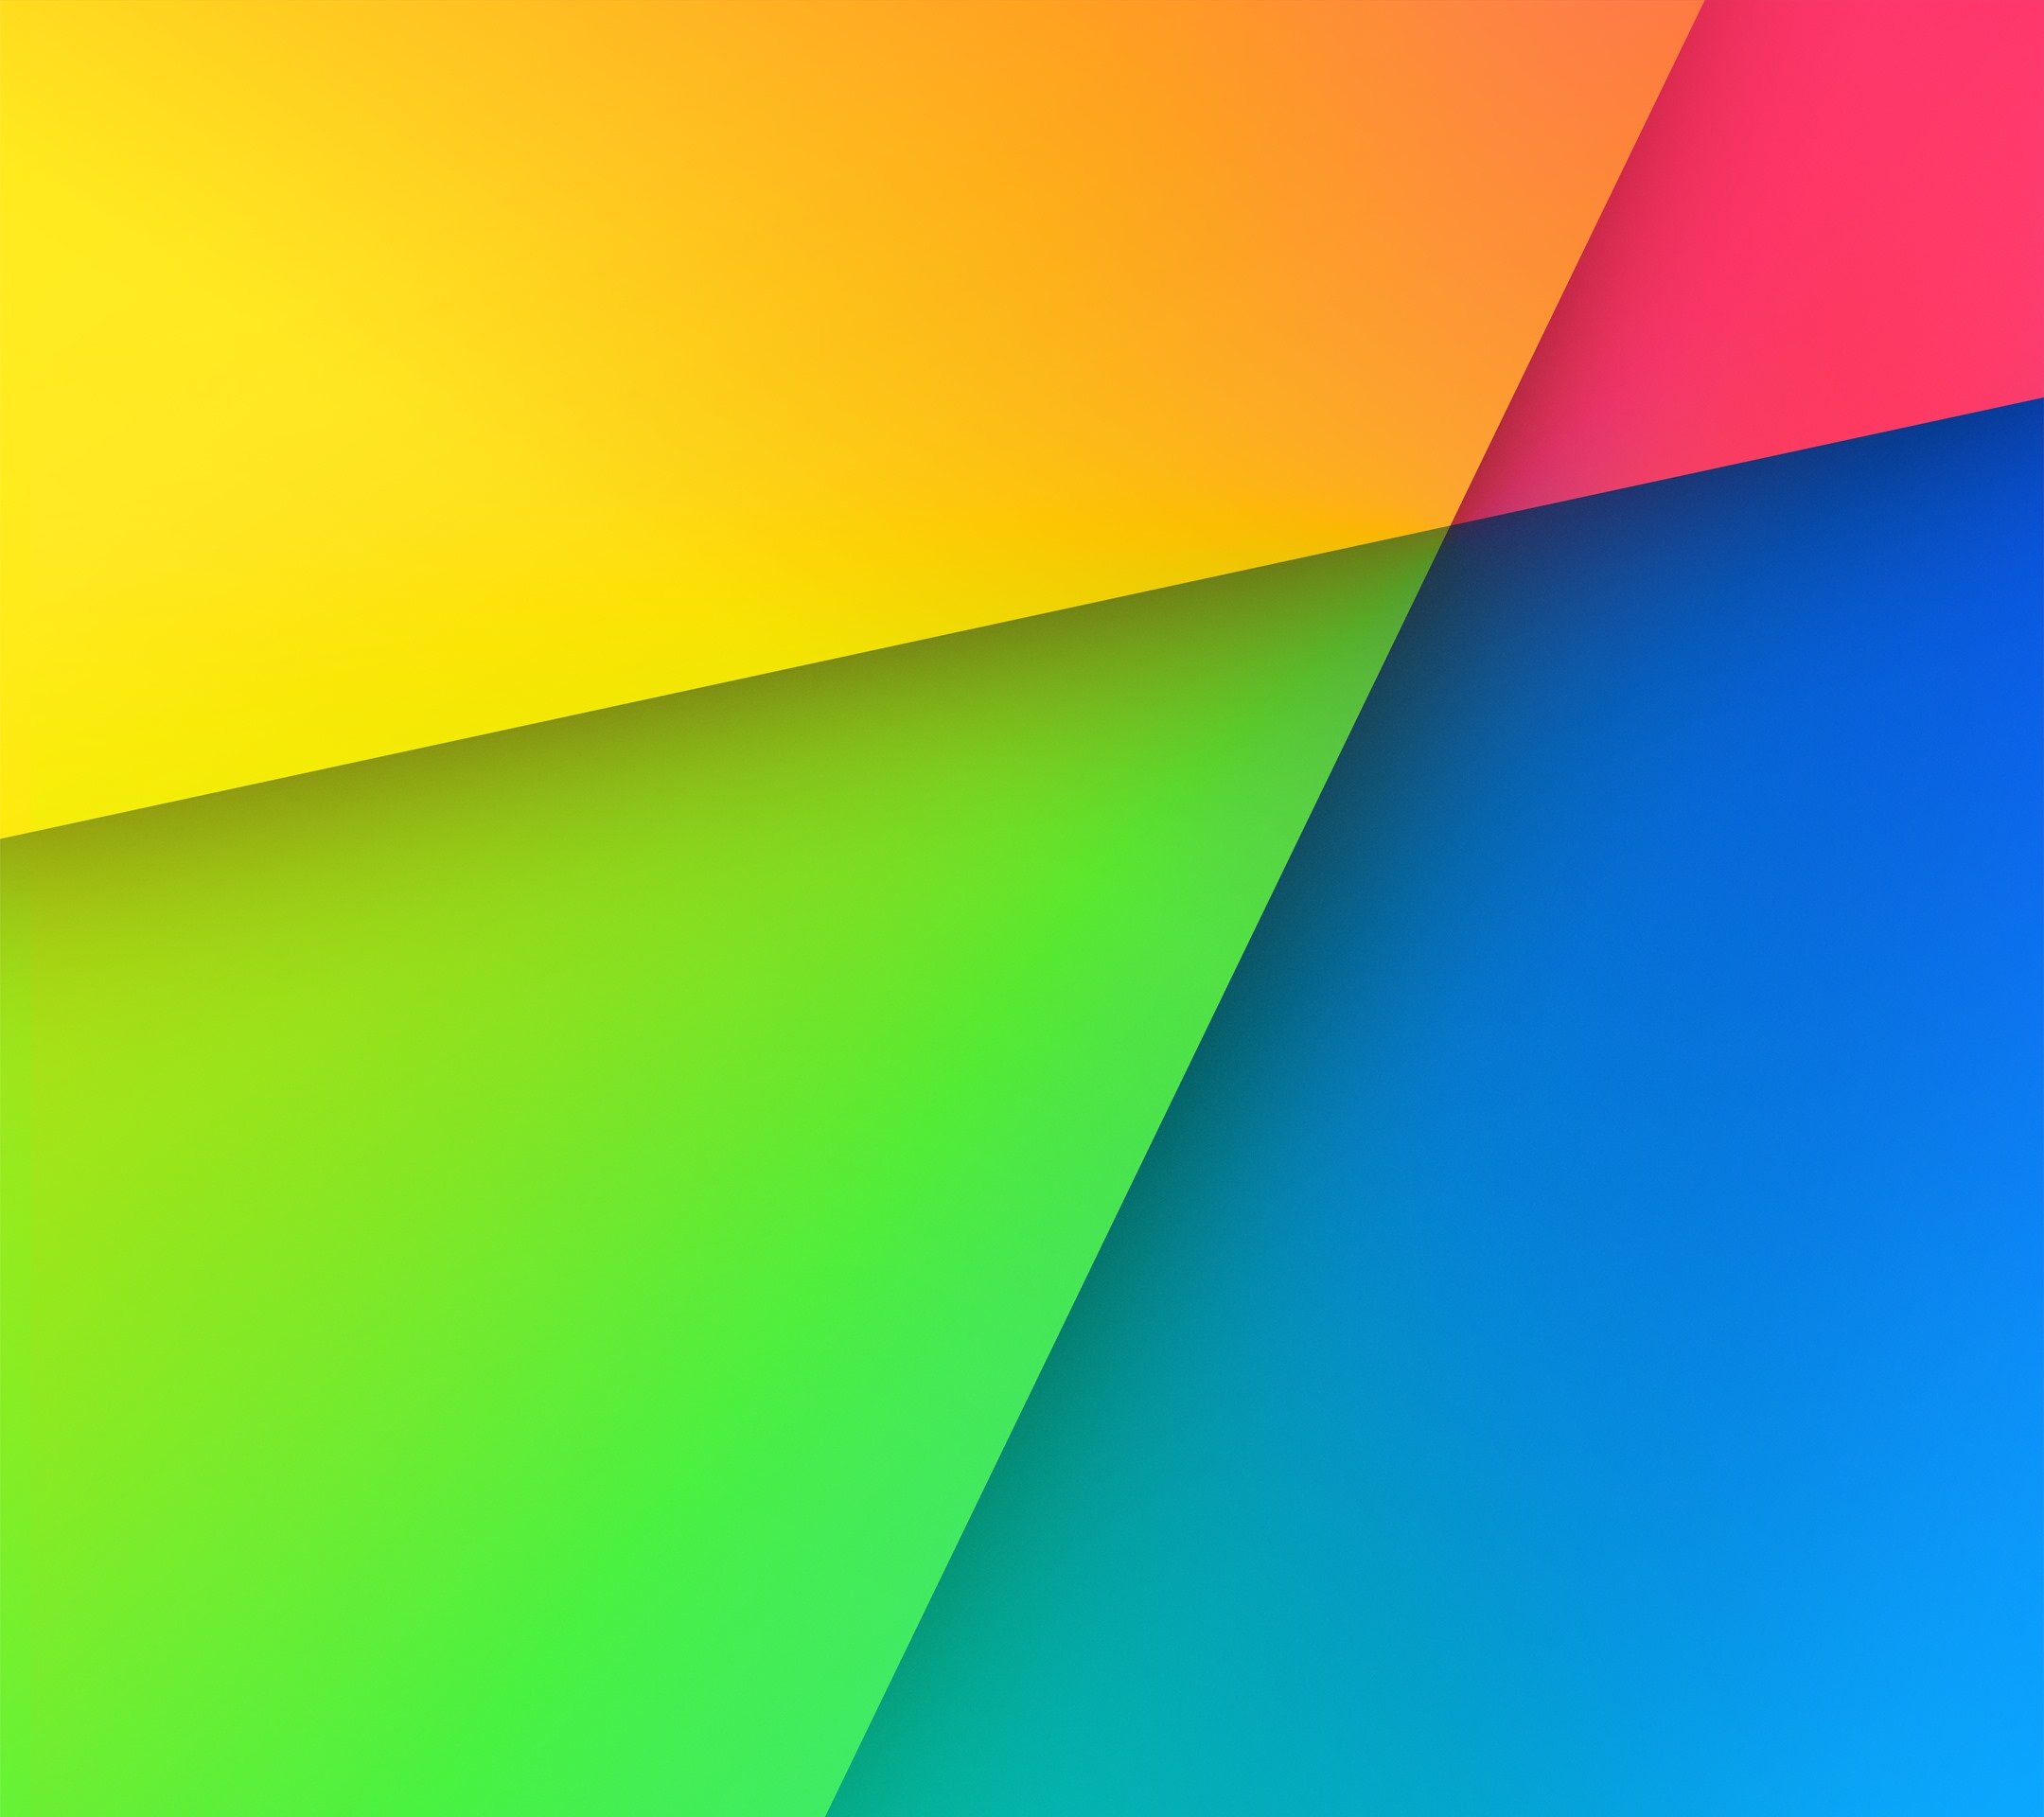  Wallpapers of Nexus 7 2013 in your Android Device   Guide   Android